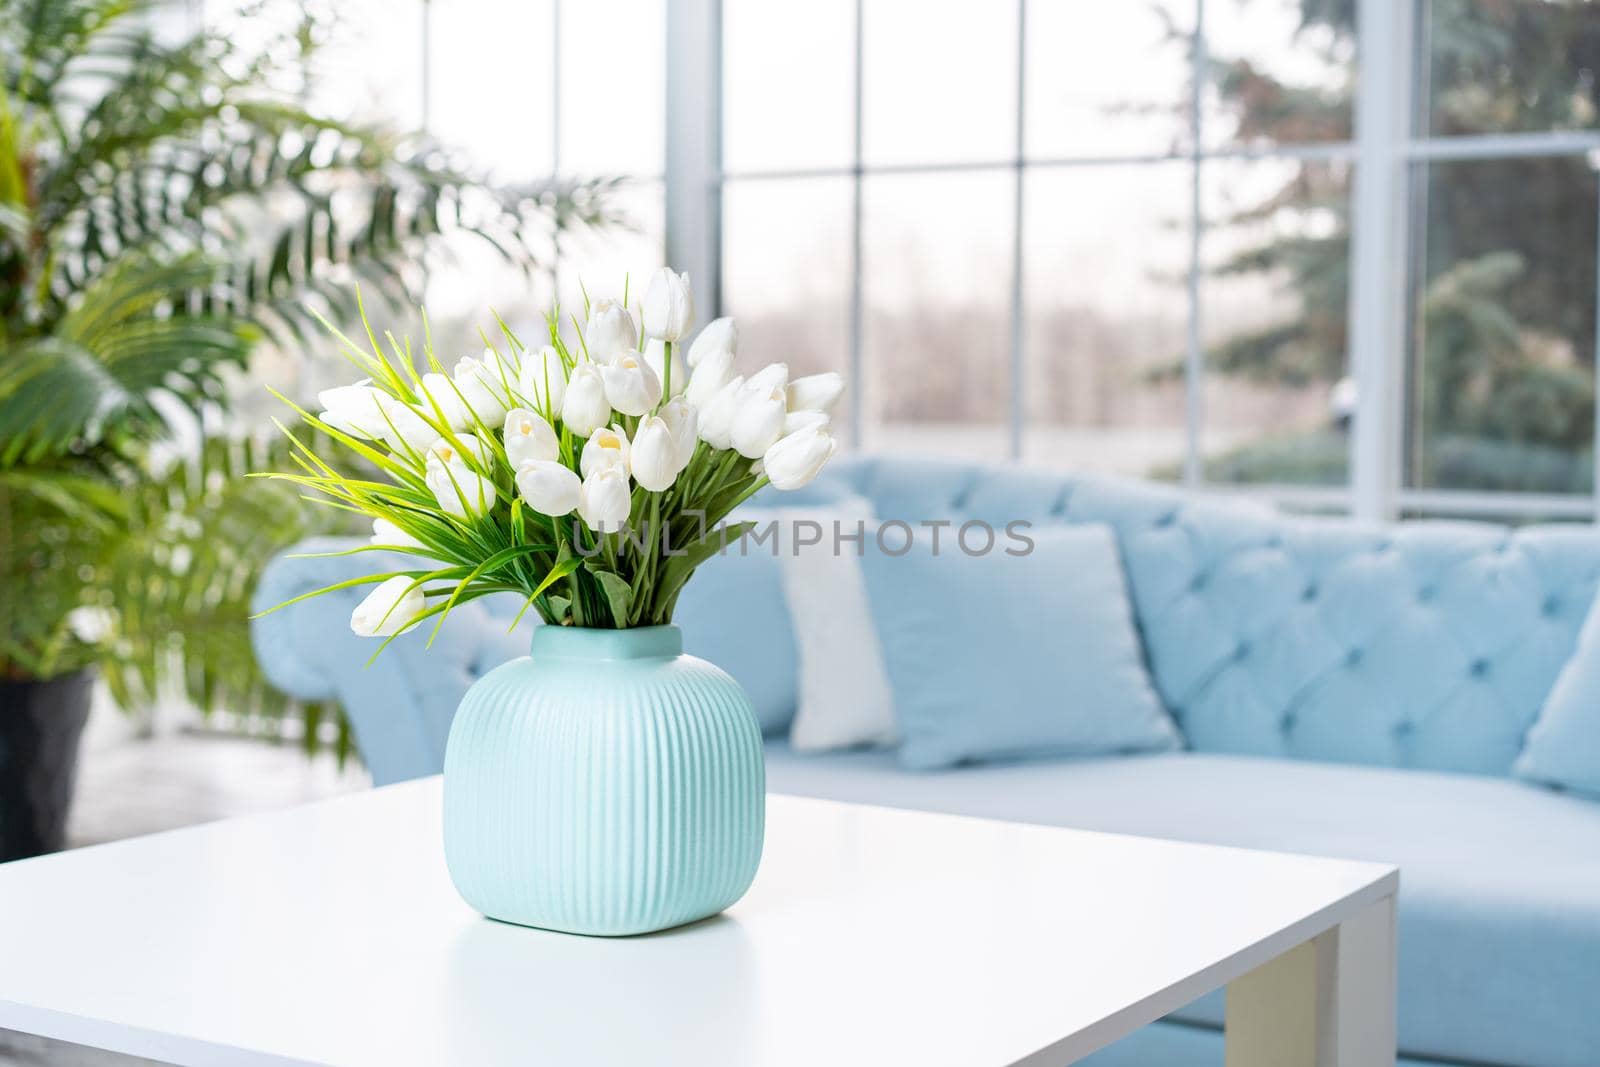 Luxury house interior. ELegant living room Modern Interior design. White Living Room Tulip flowers standing vase on coffee table With big panoramic window on background